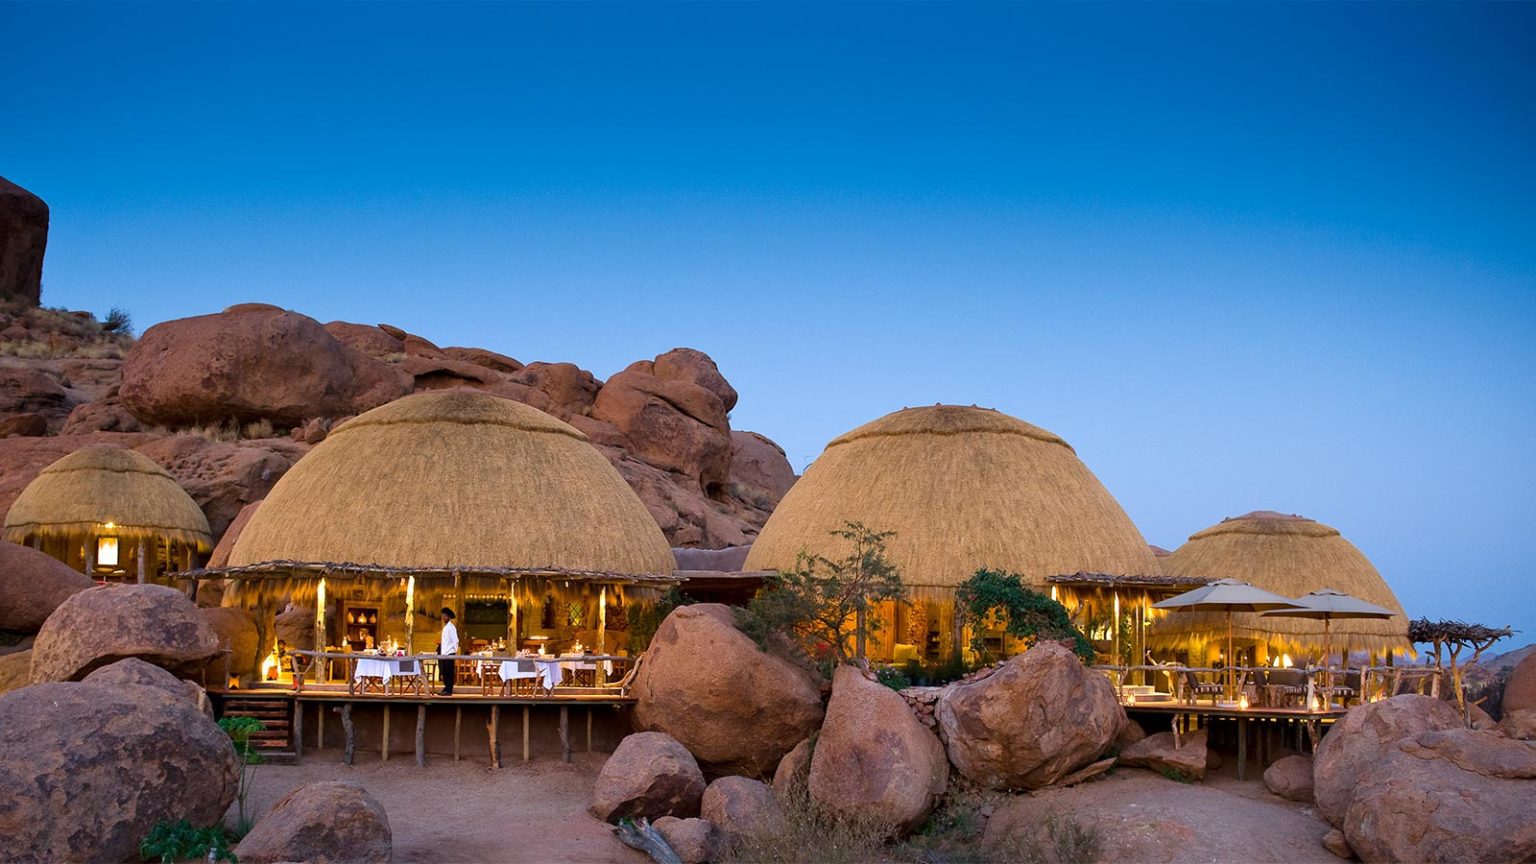 on our best Namibia safari you'll see domed thatch roofs of Camp Kipwe at sunset